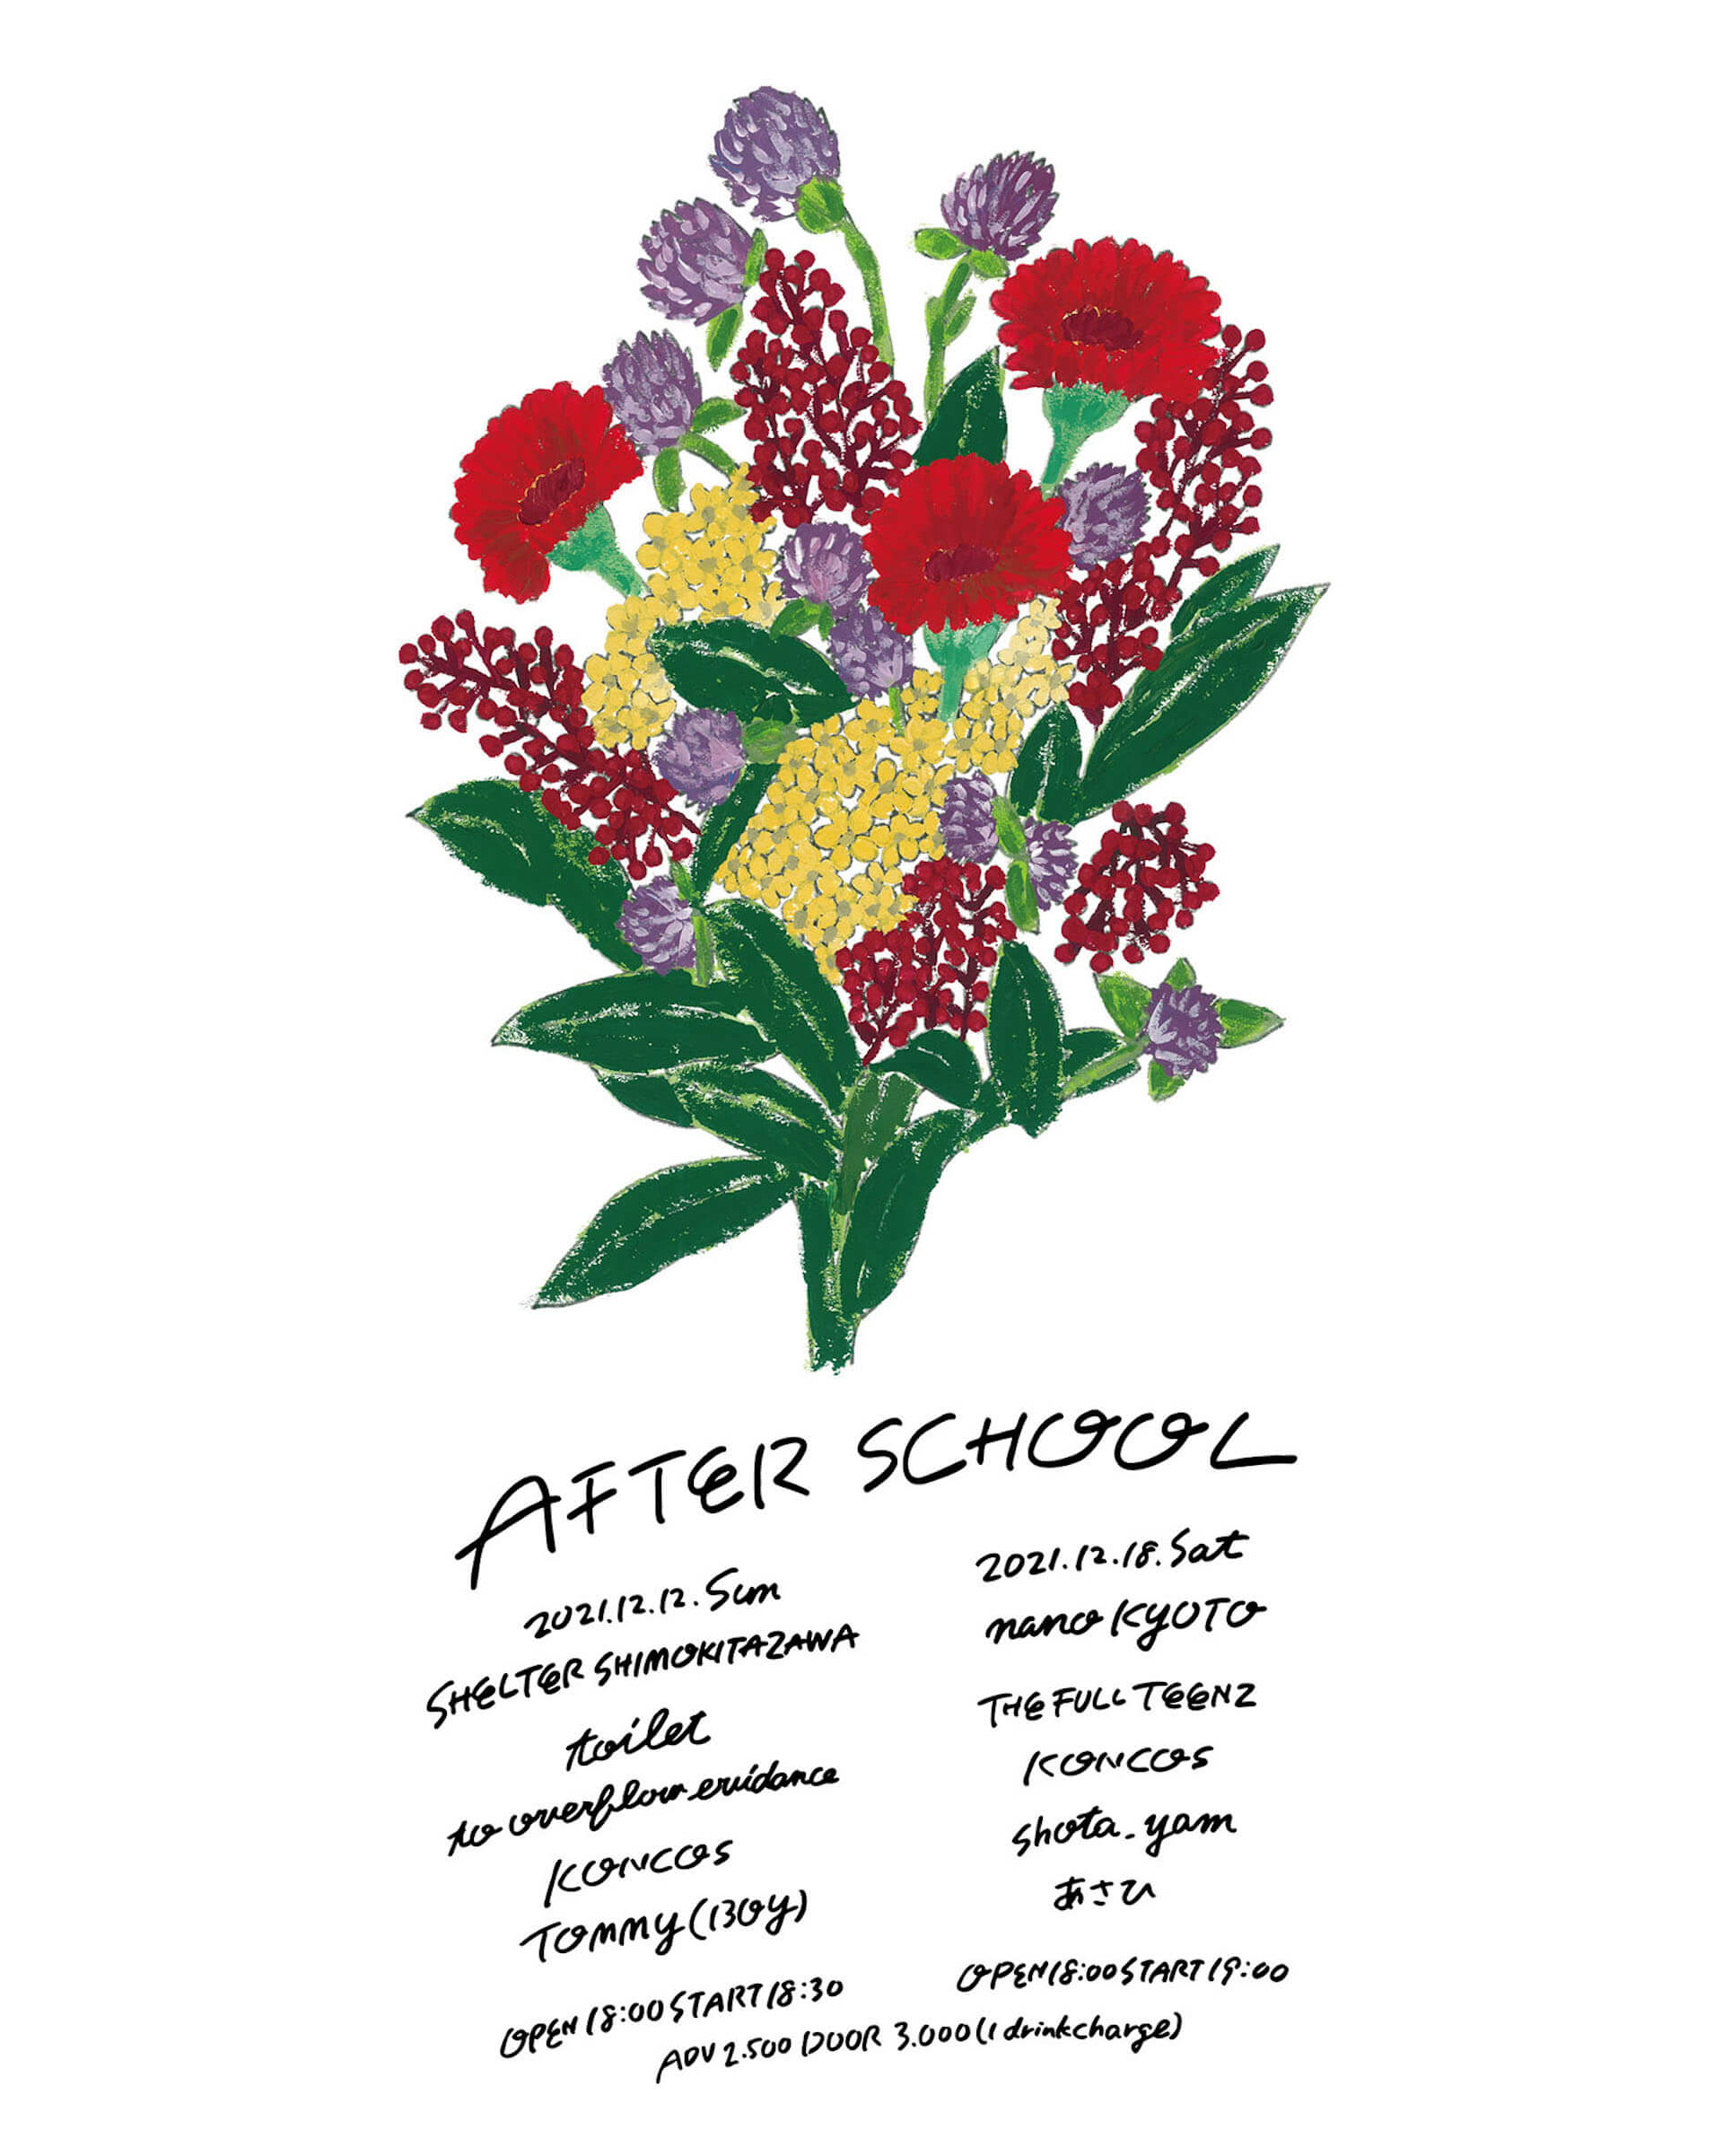 KONCOSの自主企画イベント＜AFTER SCHOOL＞が開催決定！to overflow evidence、toiletらが参加 music211117_koncos_afterschool_02